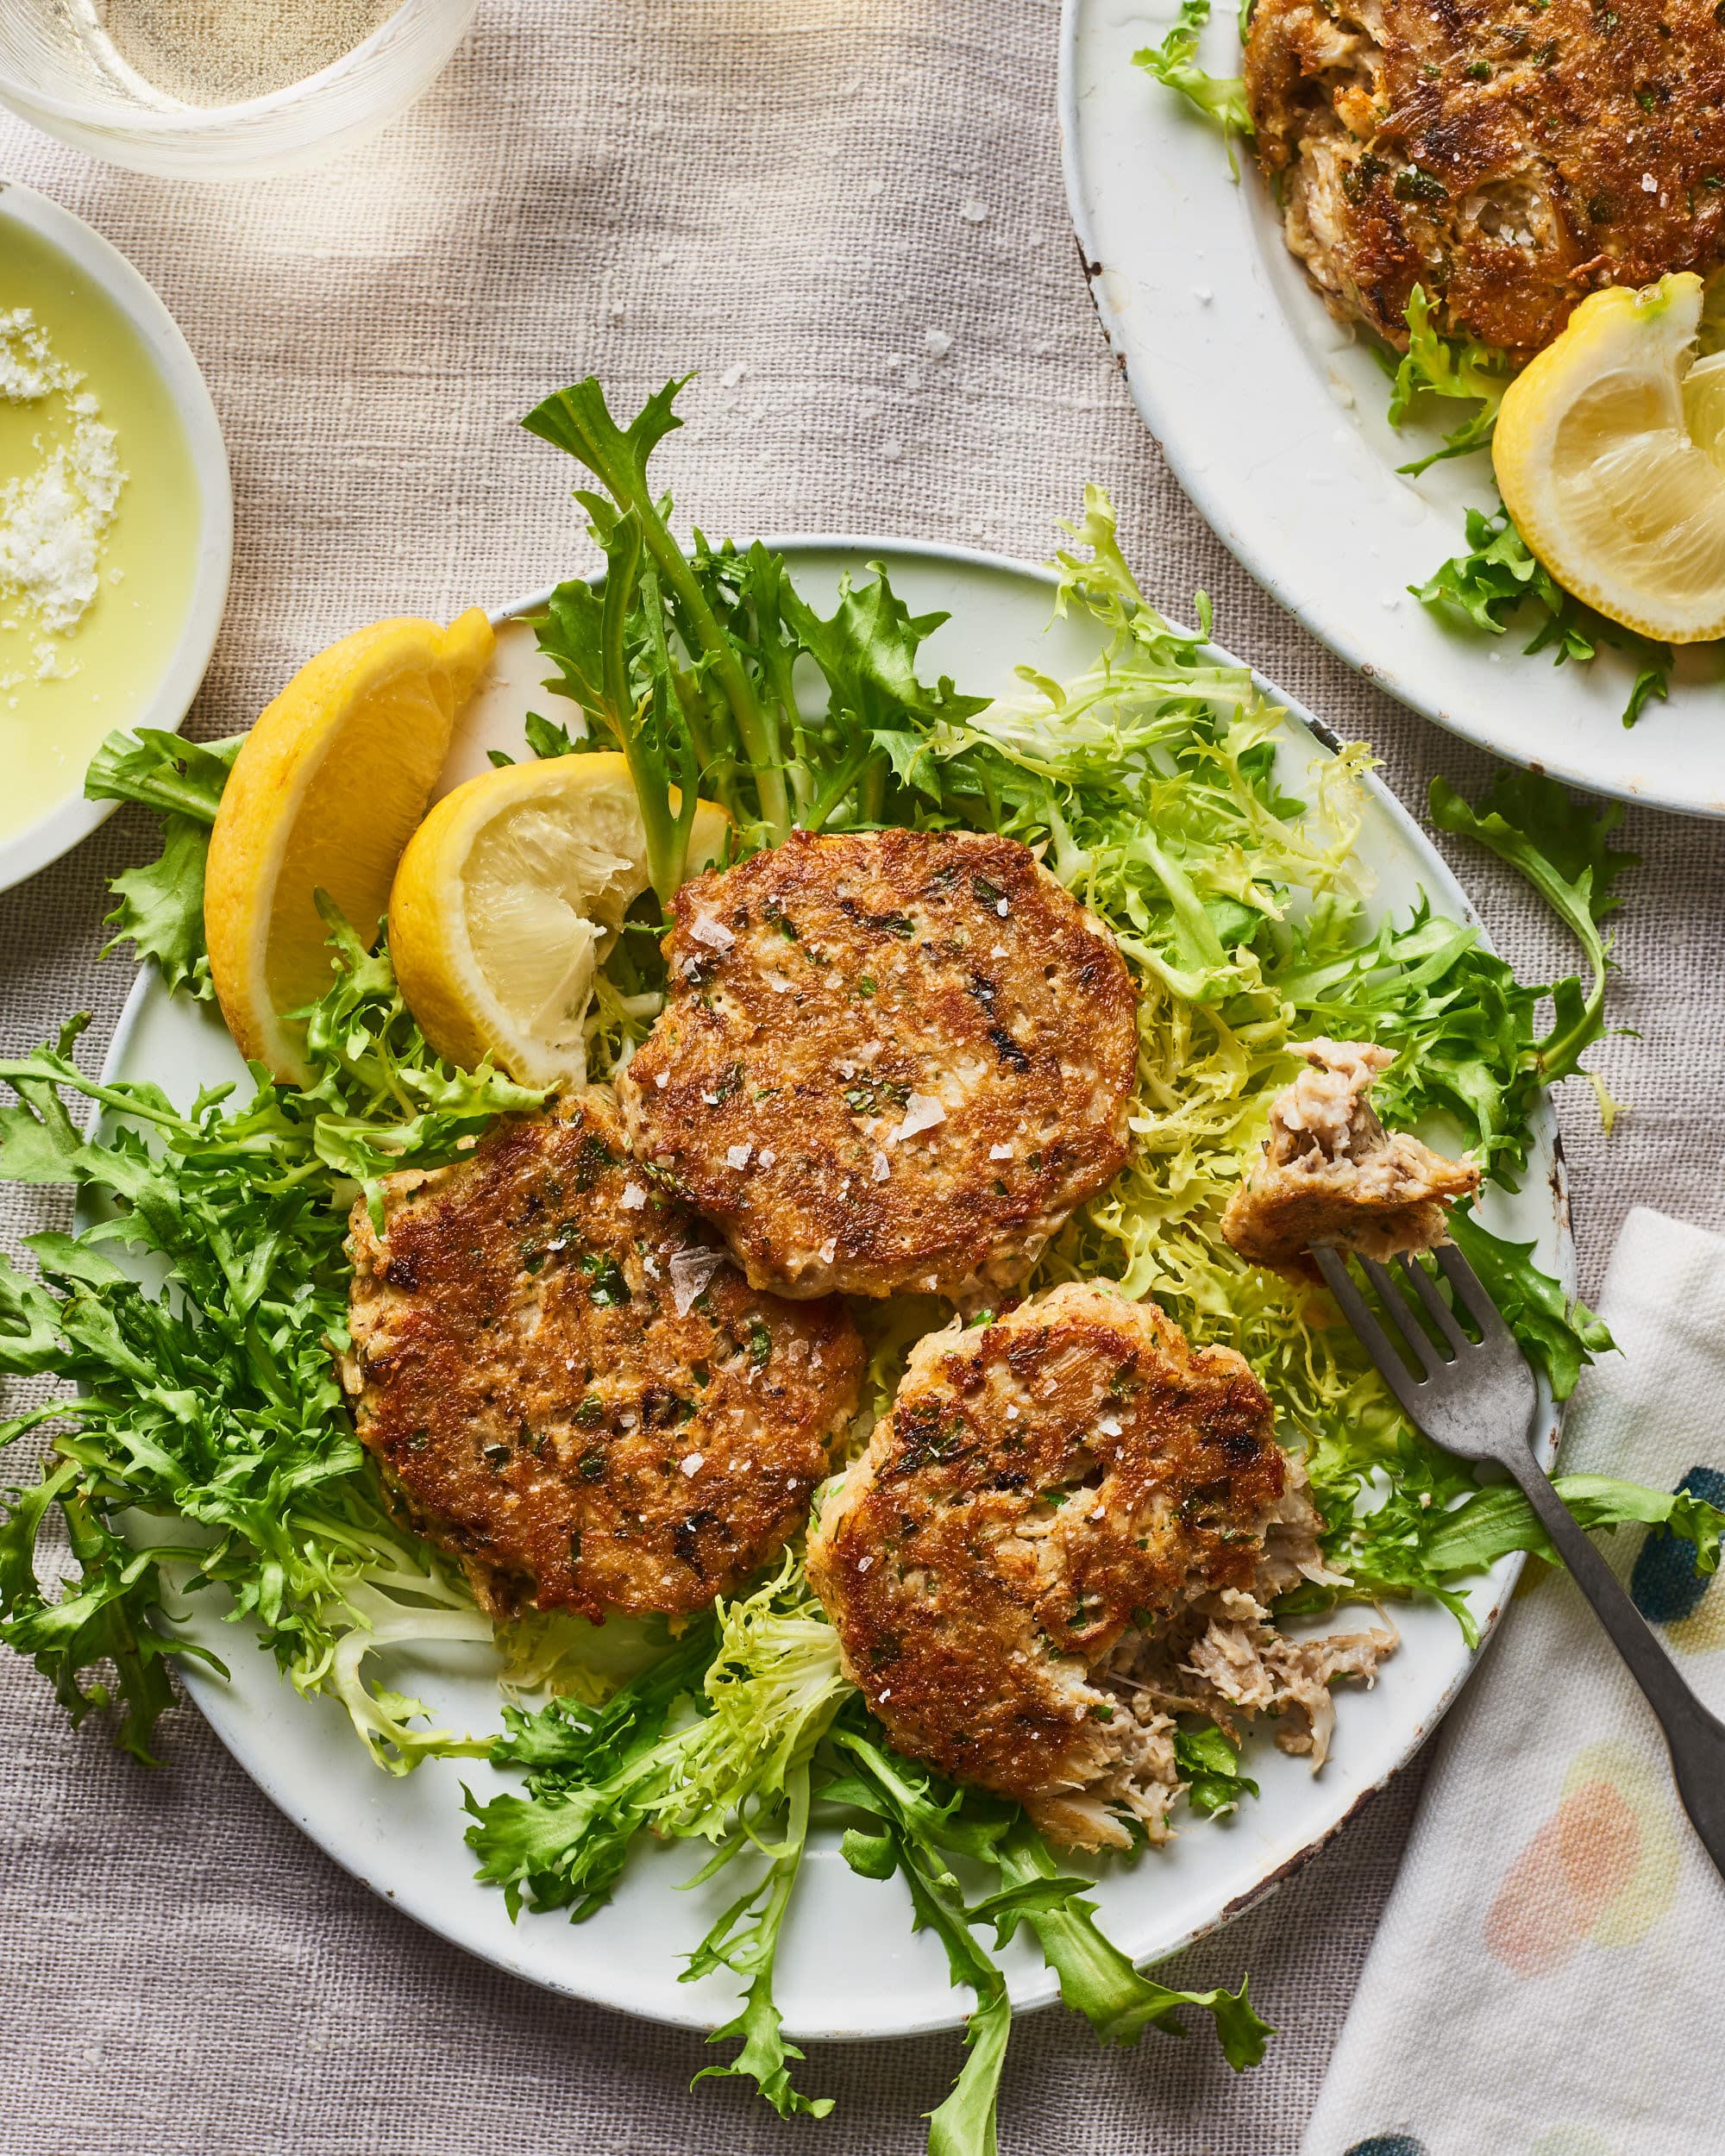 How To Make the Best Crab Cakes